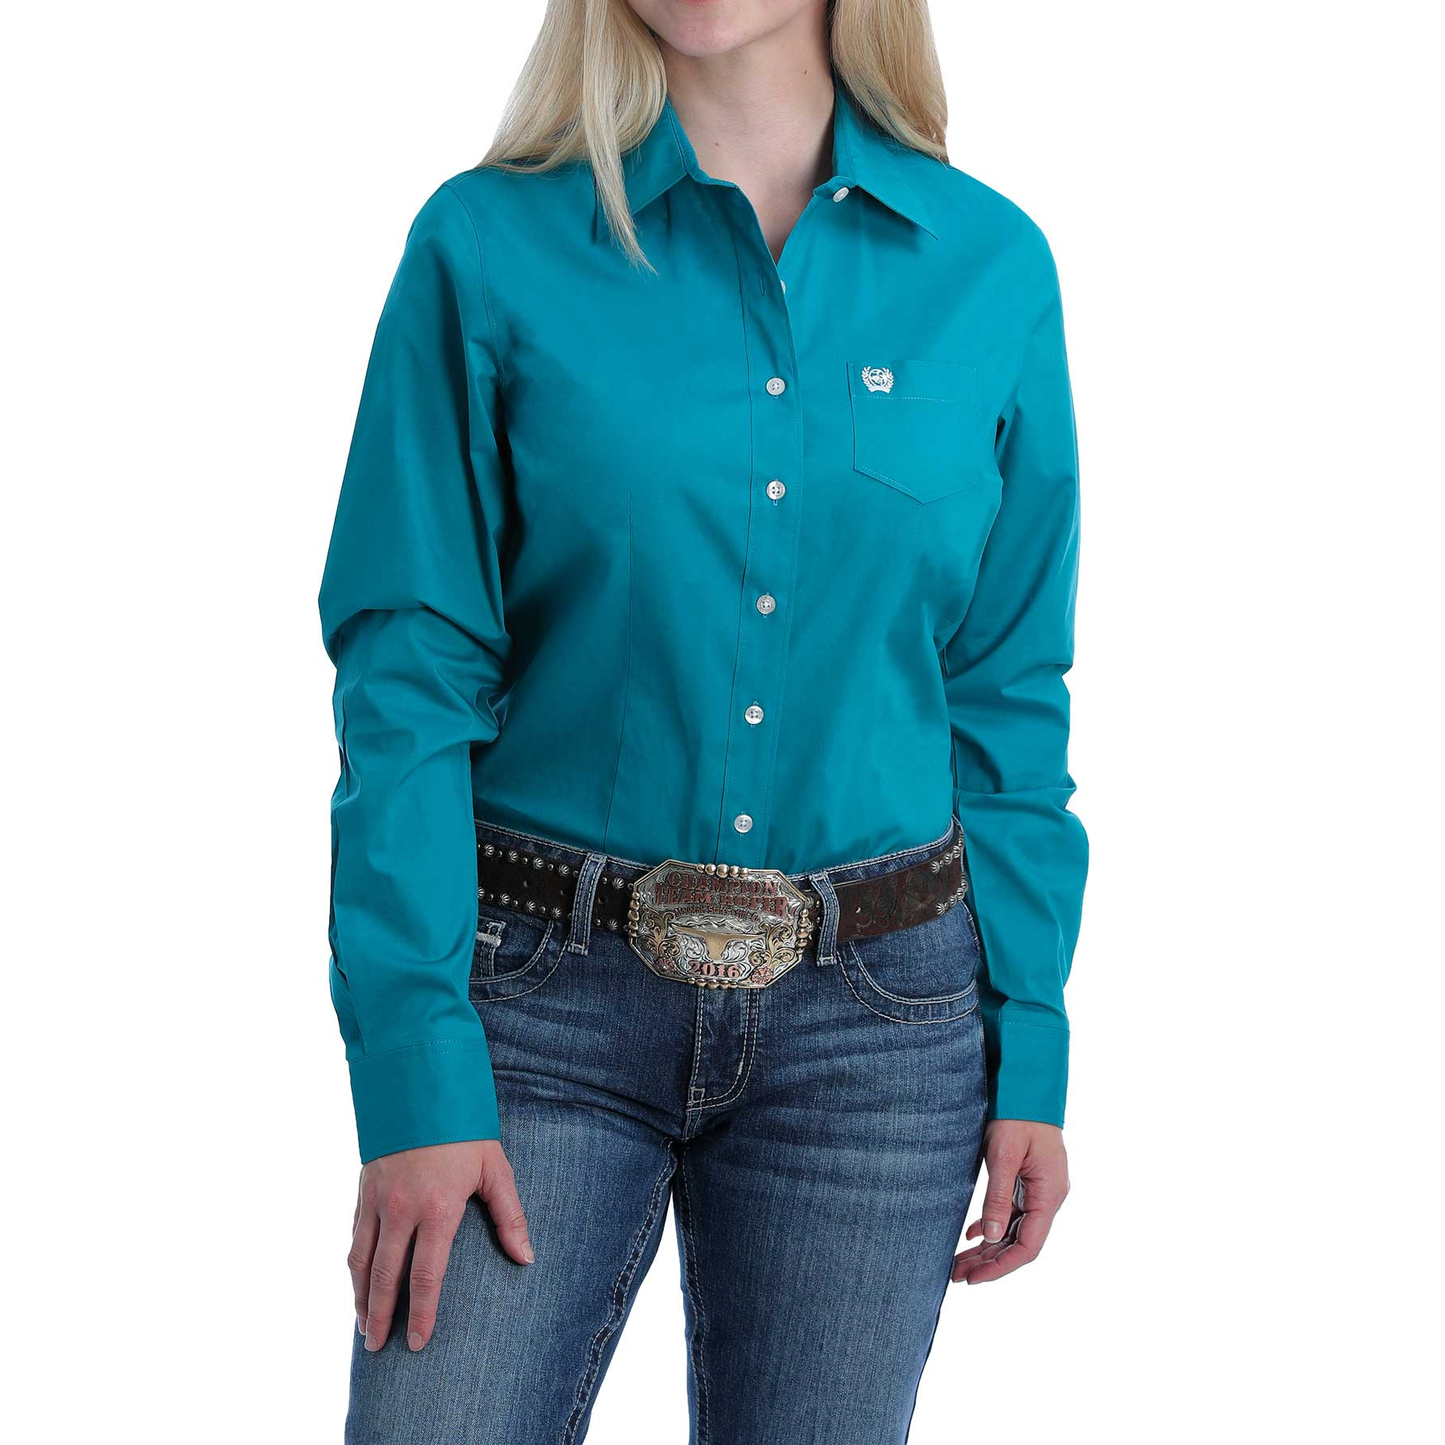 Cinch® Ladies Solid Teal Button Down Shirt MSW9164167